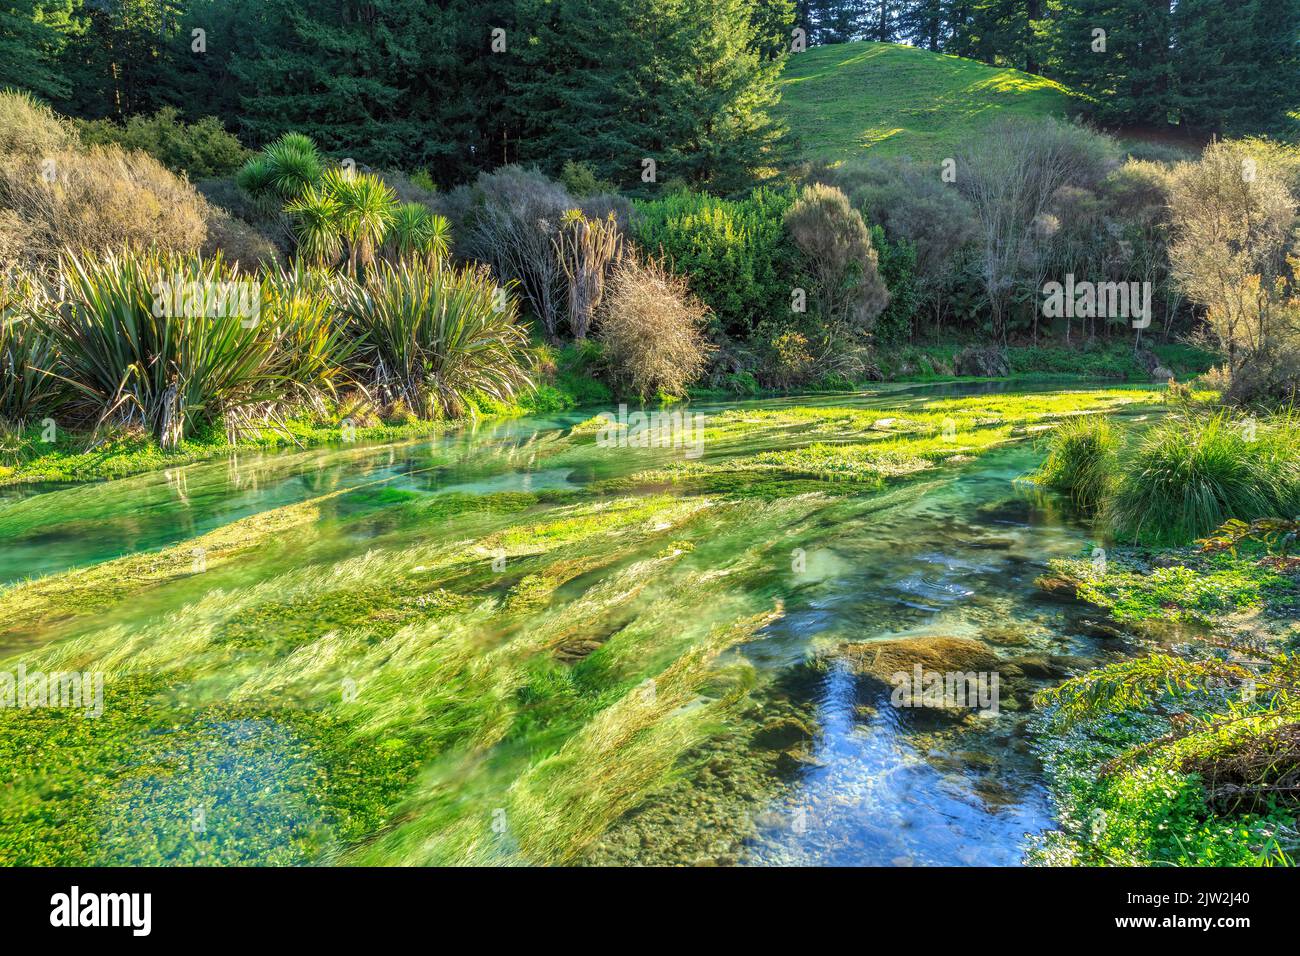 Water plants swaying in the clear waters of the Blue Spring at Te Waihou, a tourist attraction near Putaruru, New Zealand Stock Photo